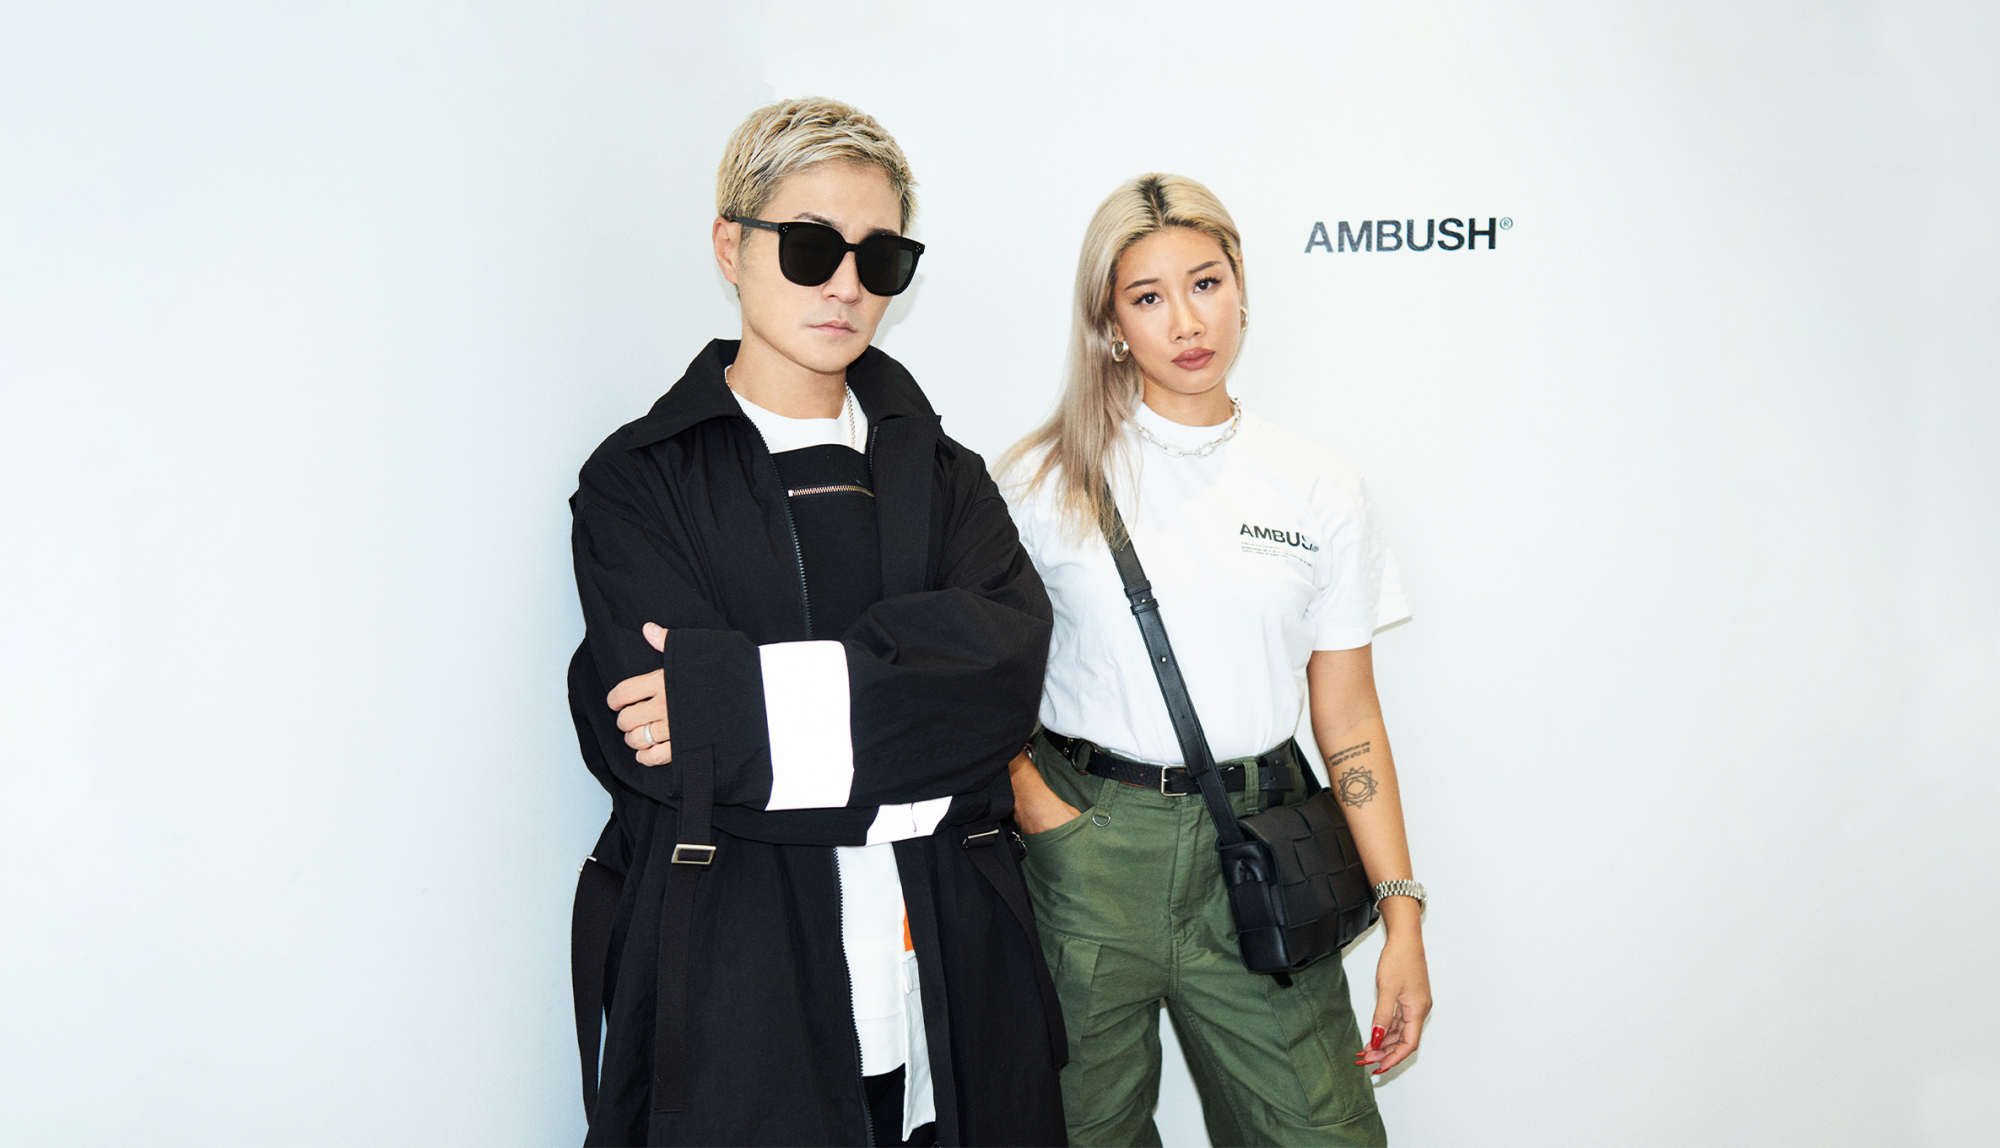 Interview YOON & VERBAL Co-founders of AMBUSH®